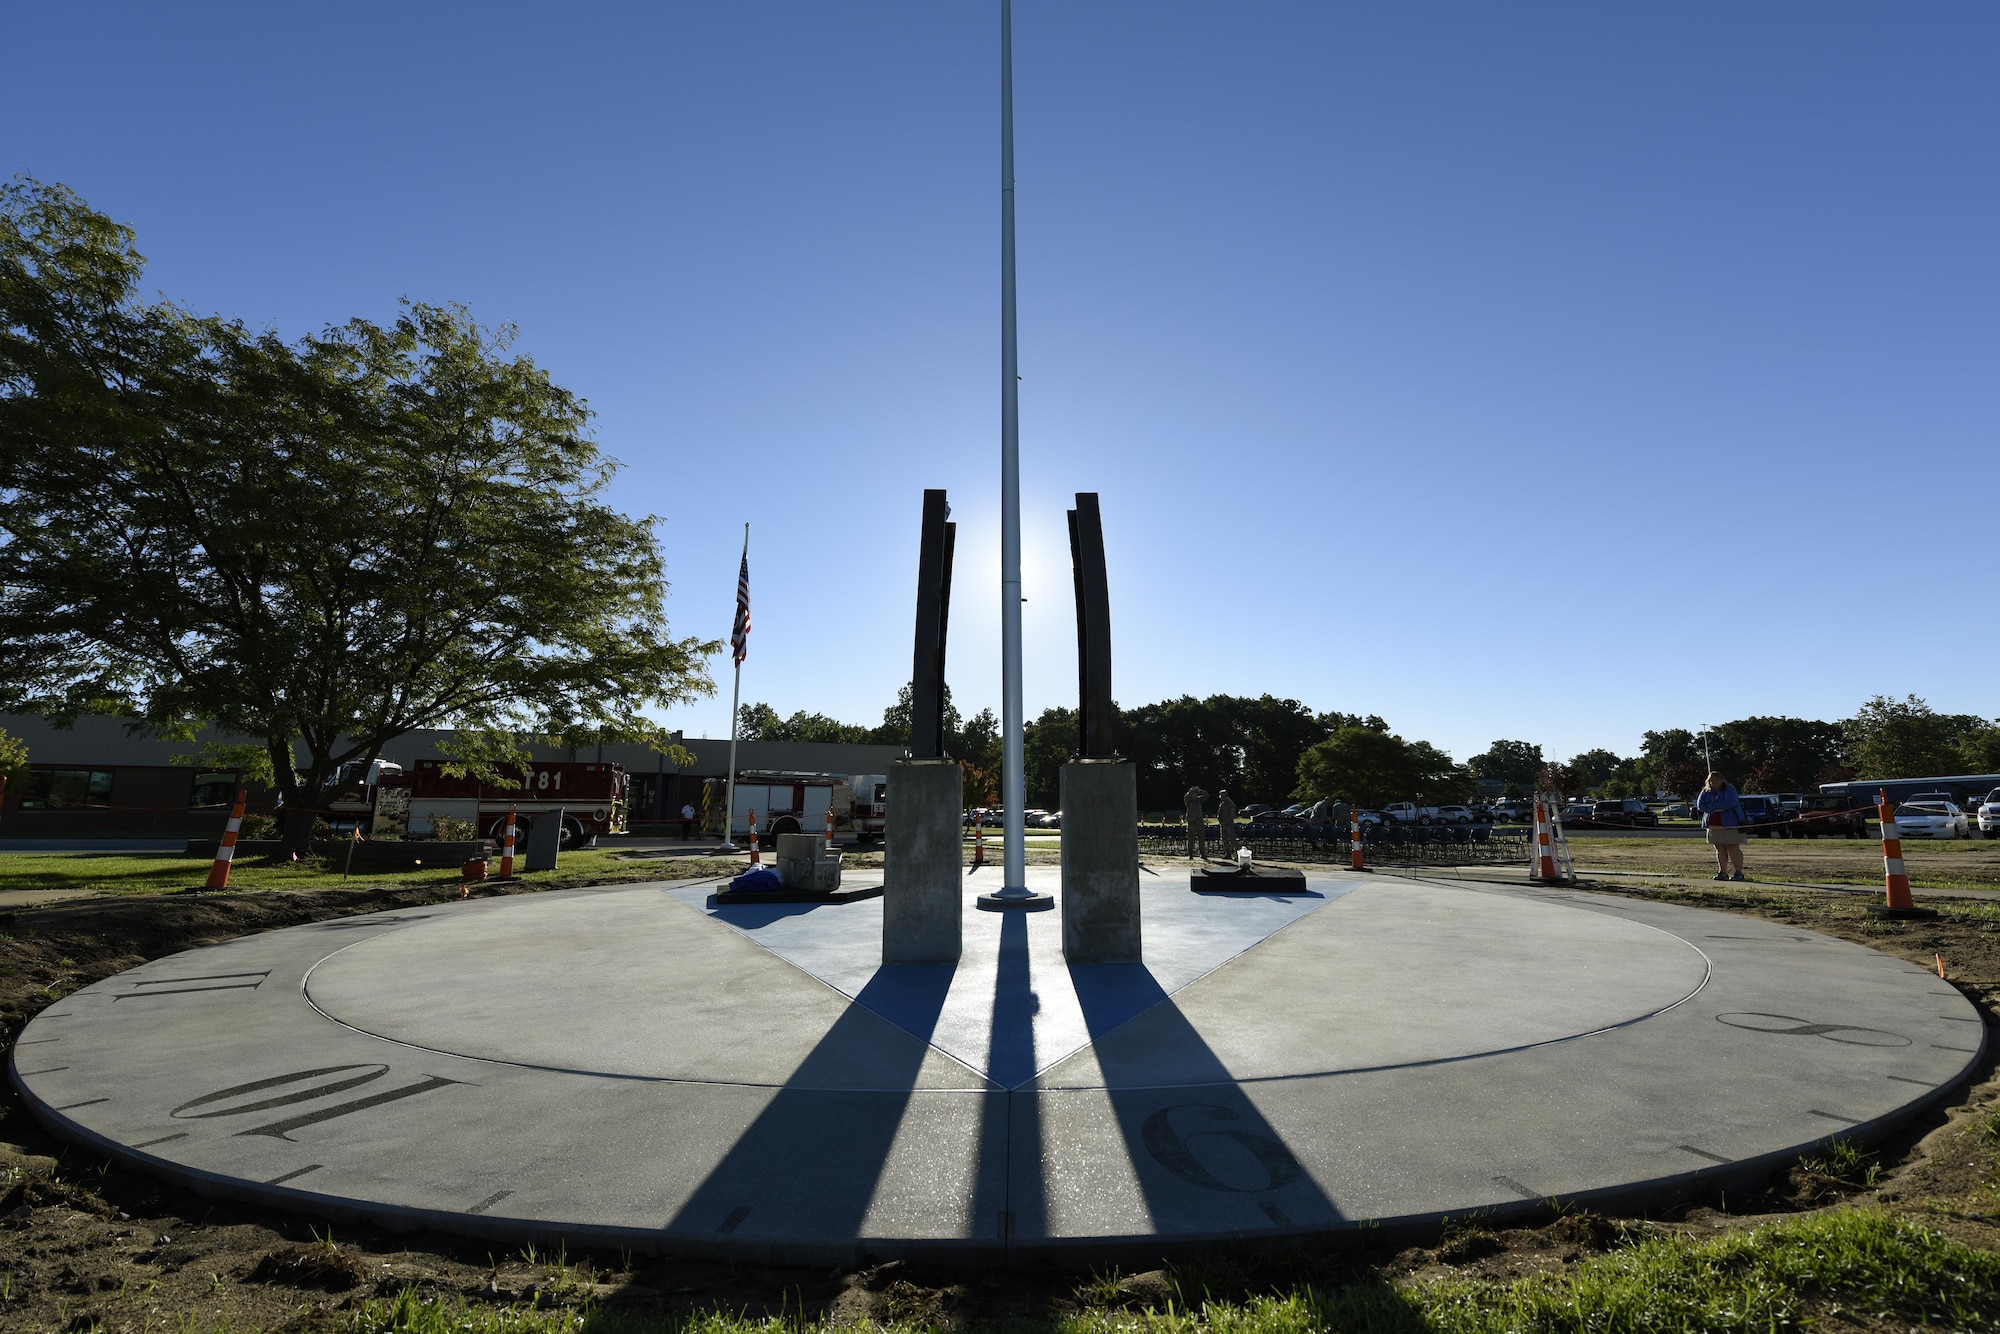 The shadow of the flagpole falls across the clock face of the Northwest Ohio 9/11 Memorial located at the center of the 180th Fighter Wing in Swanton, Ohio, on the morning of the 15th anniversary of the attacks on Sept. 11, 2001, marking the exact time the first plane struck the north tower of the World Trade Center. The monument memorializes the loss of nearly 3,000 lives during the attacks and since. (U.S. Air National Guard photo by Staff Sgt. Shane Hughes)